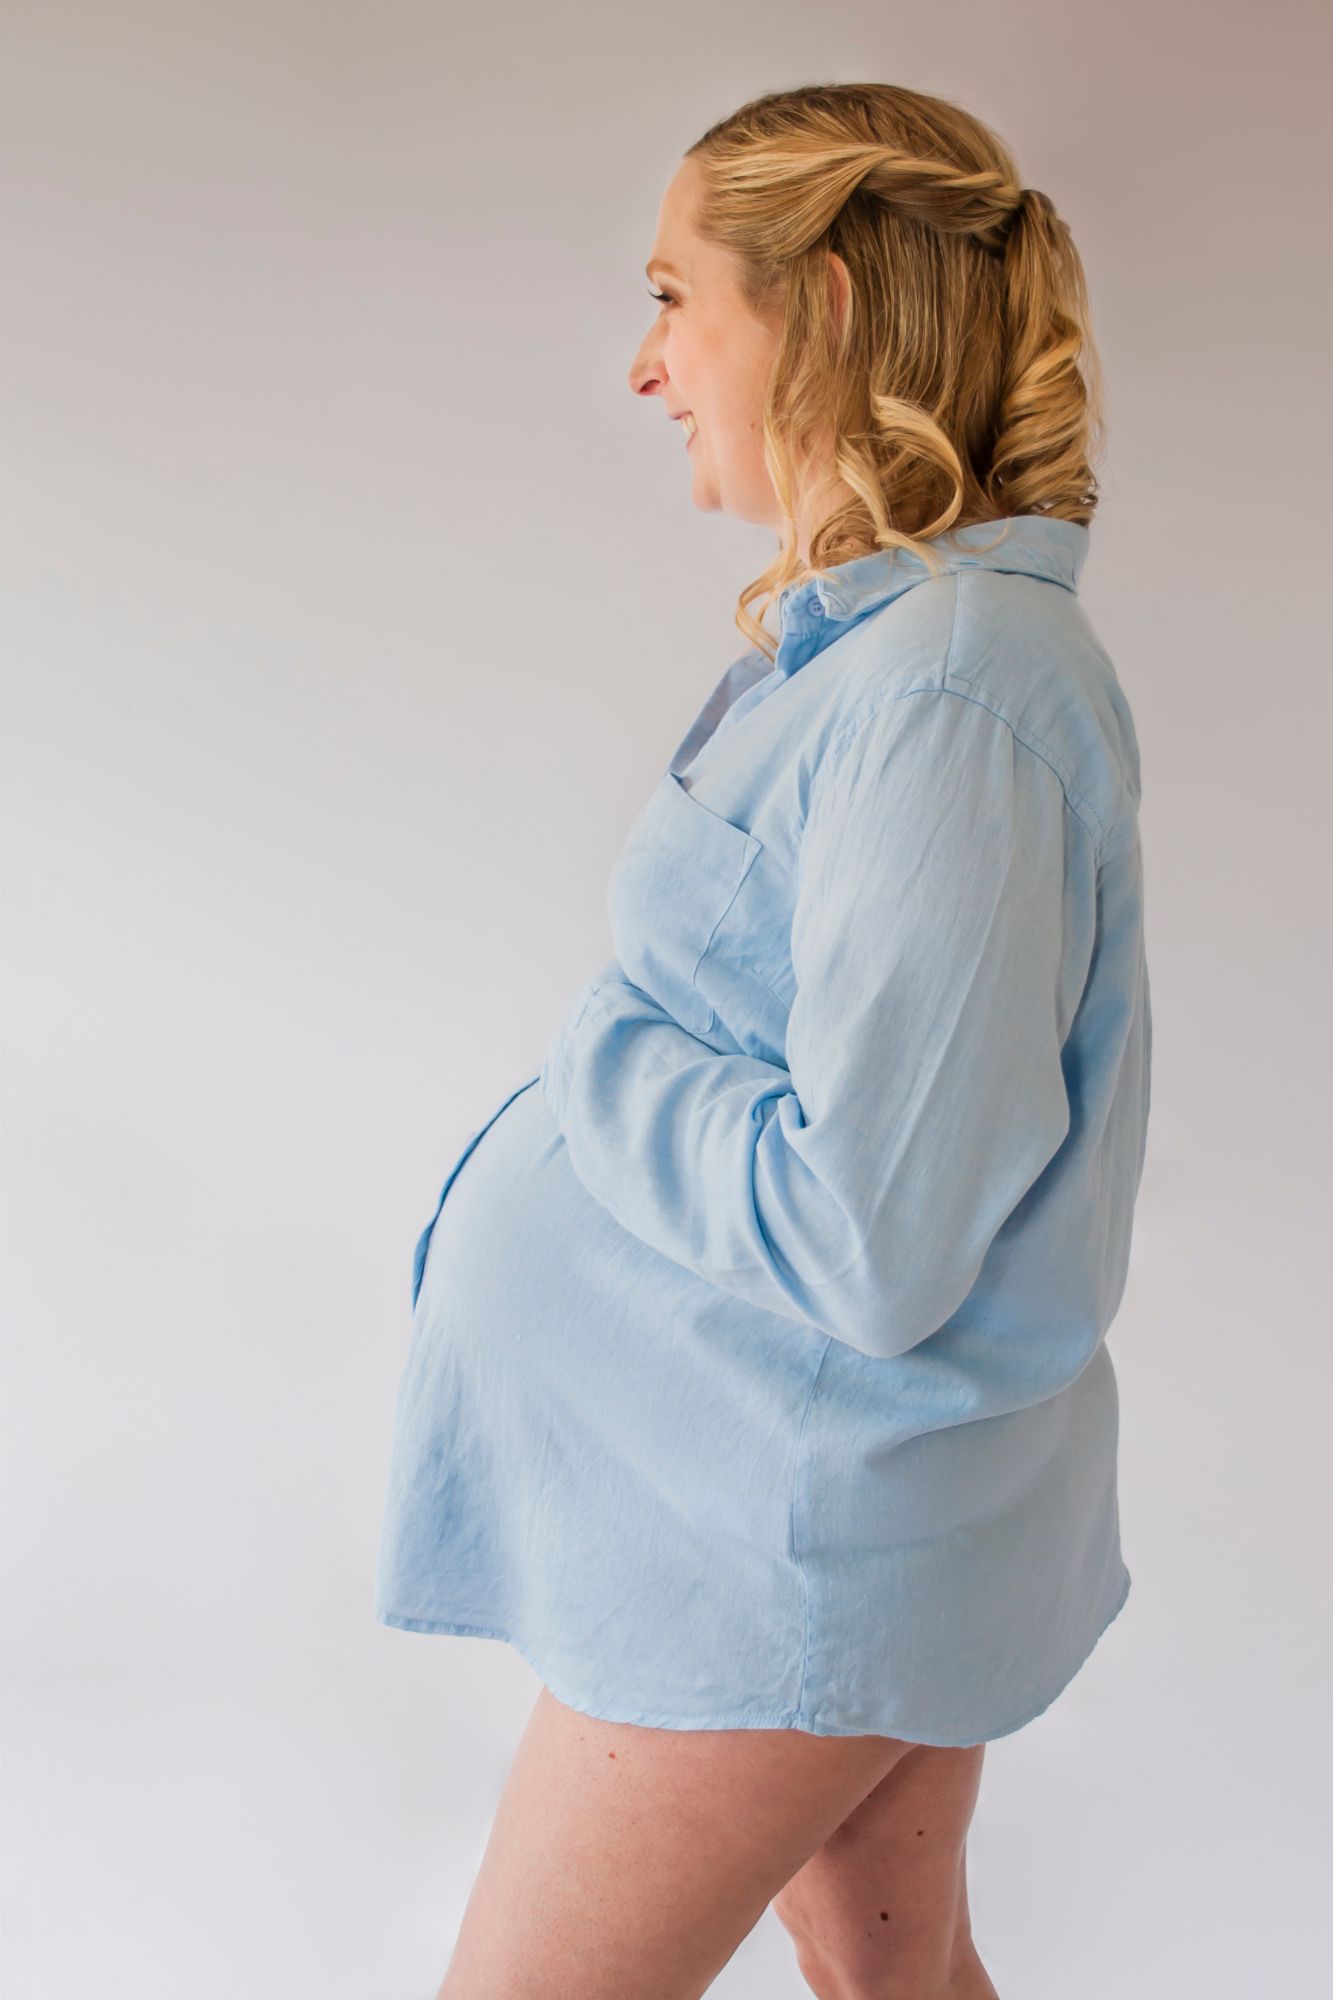 A mother to be stands in a blue shirt against the white wall in her kitchen and rests her hand on her bump